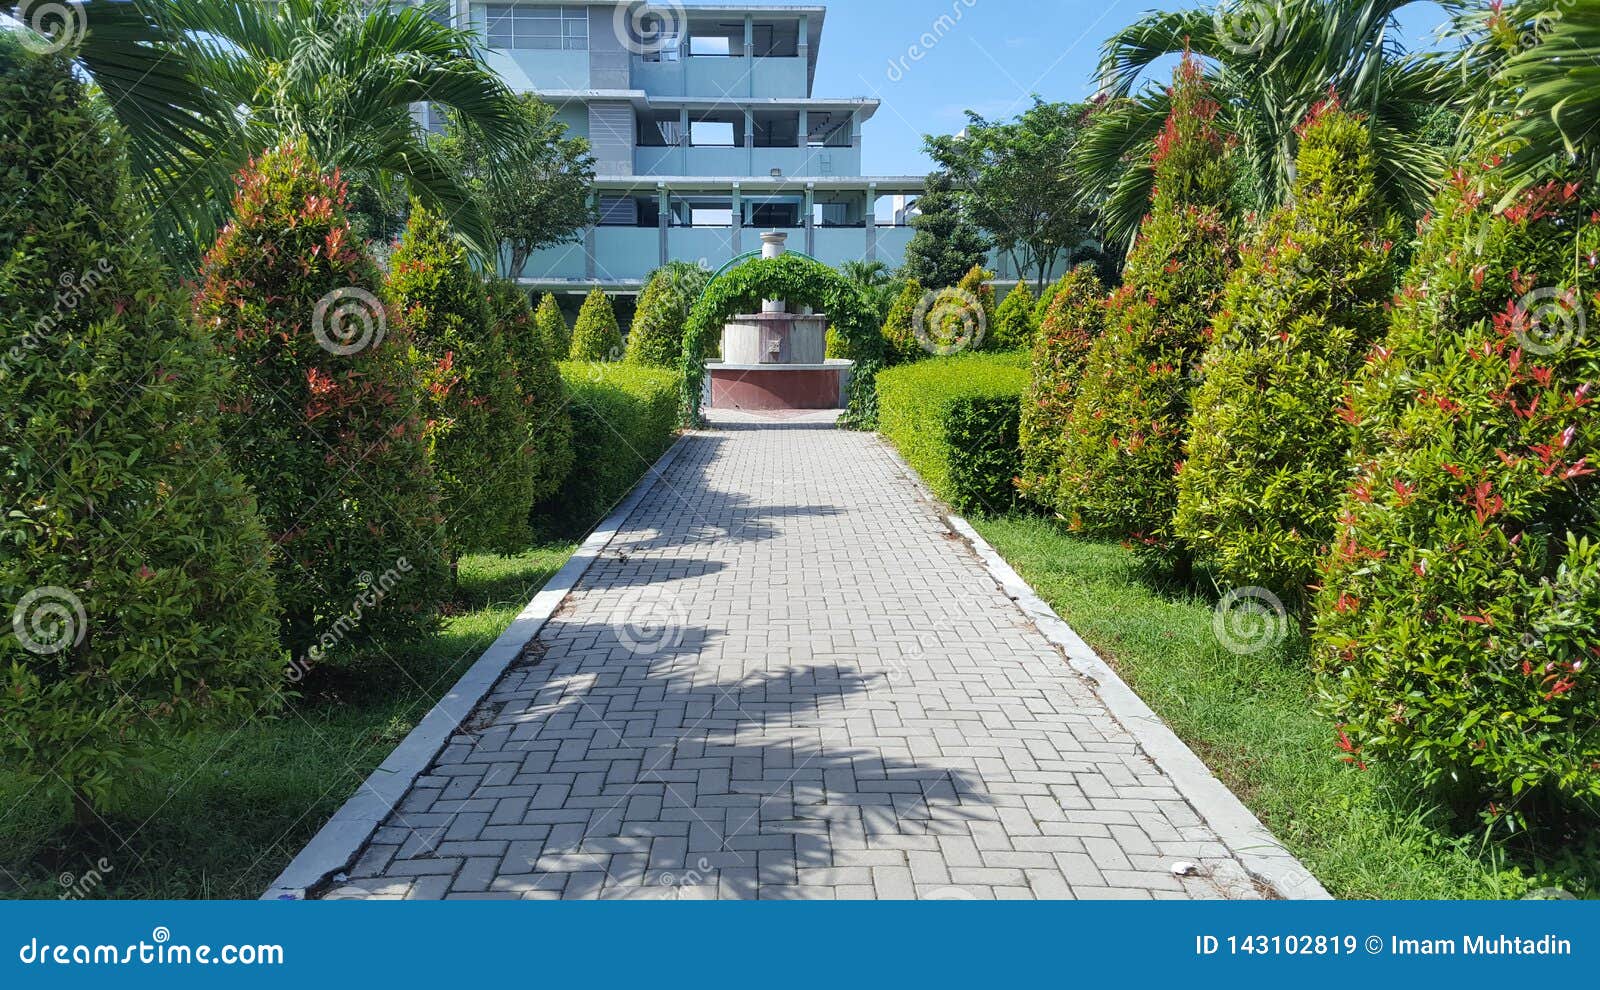 Palmtrees In Park Hospital With Natural Plants That Give The